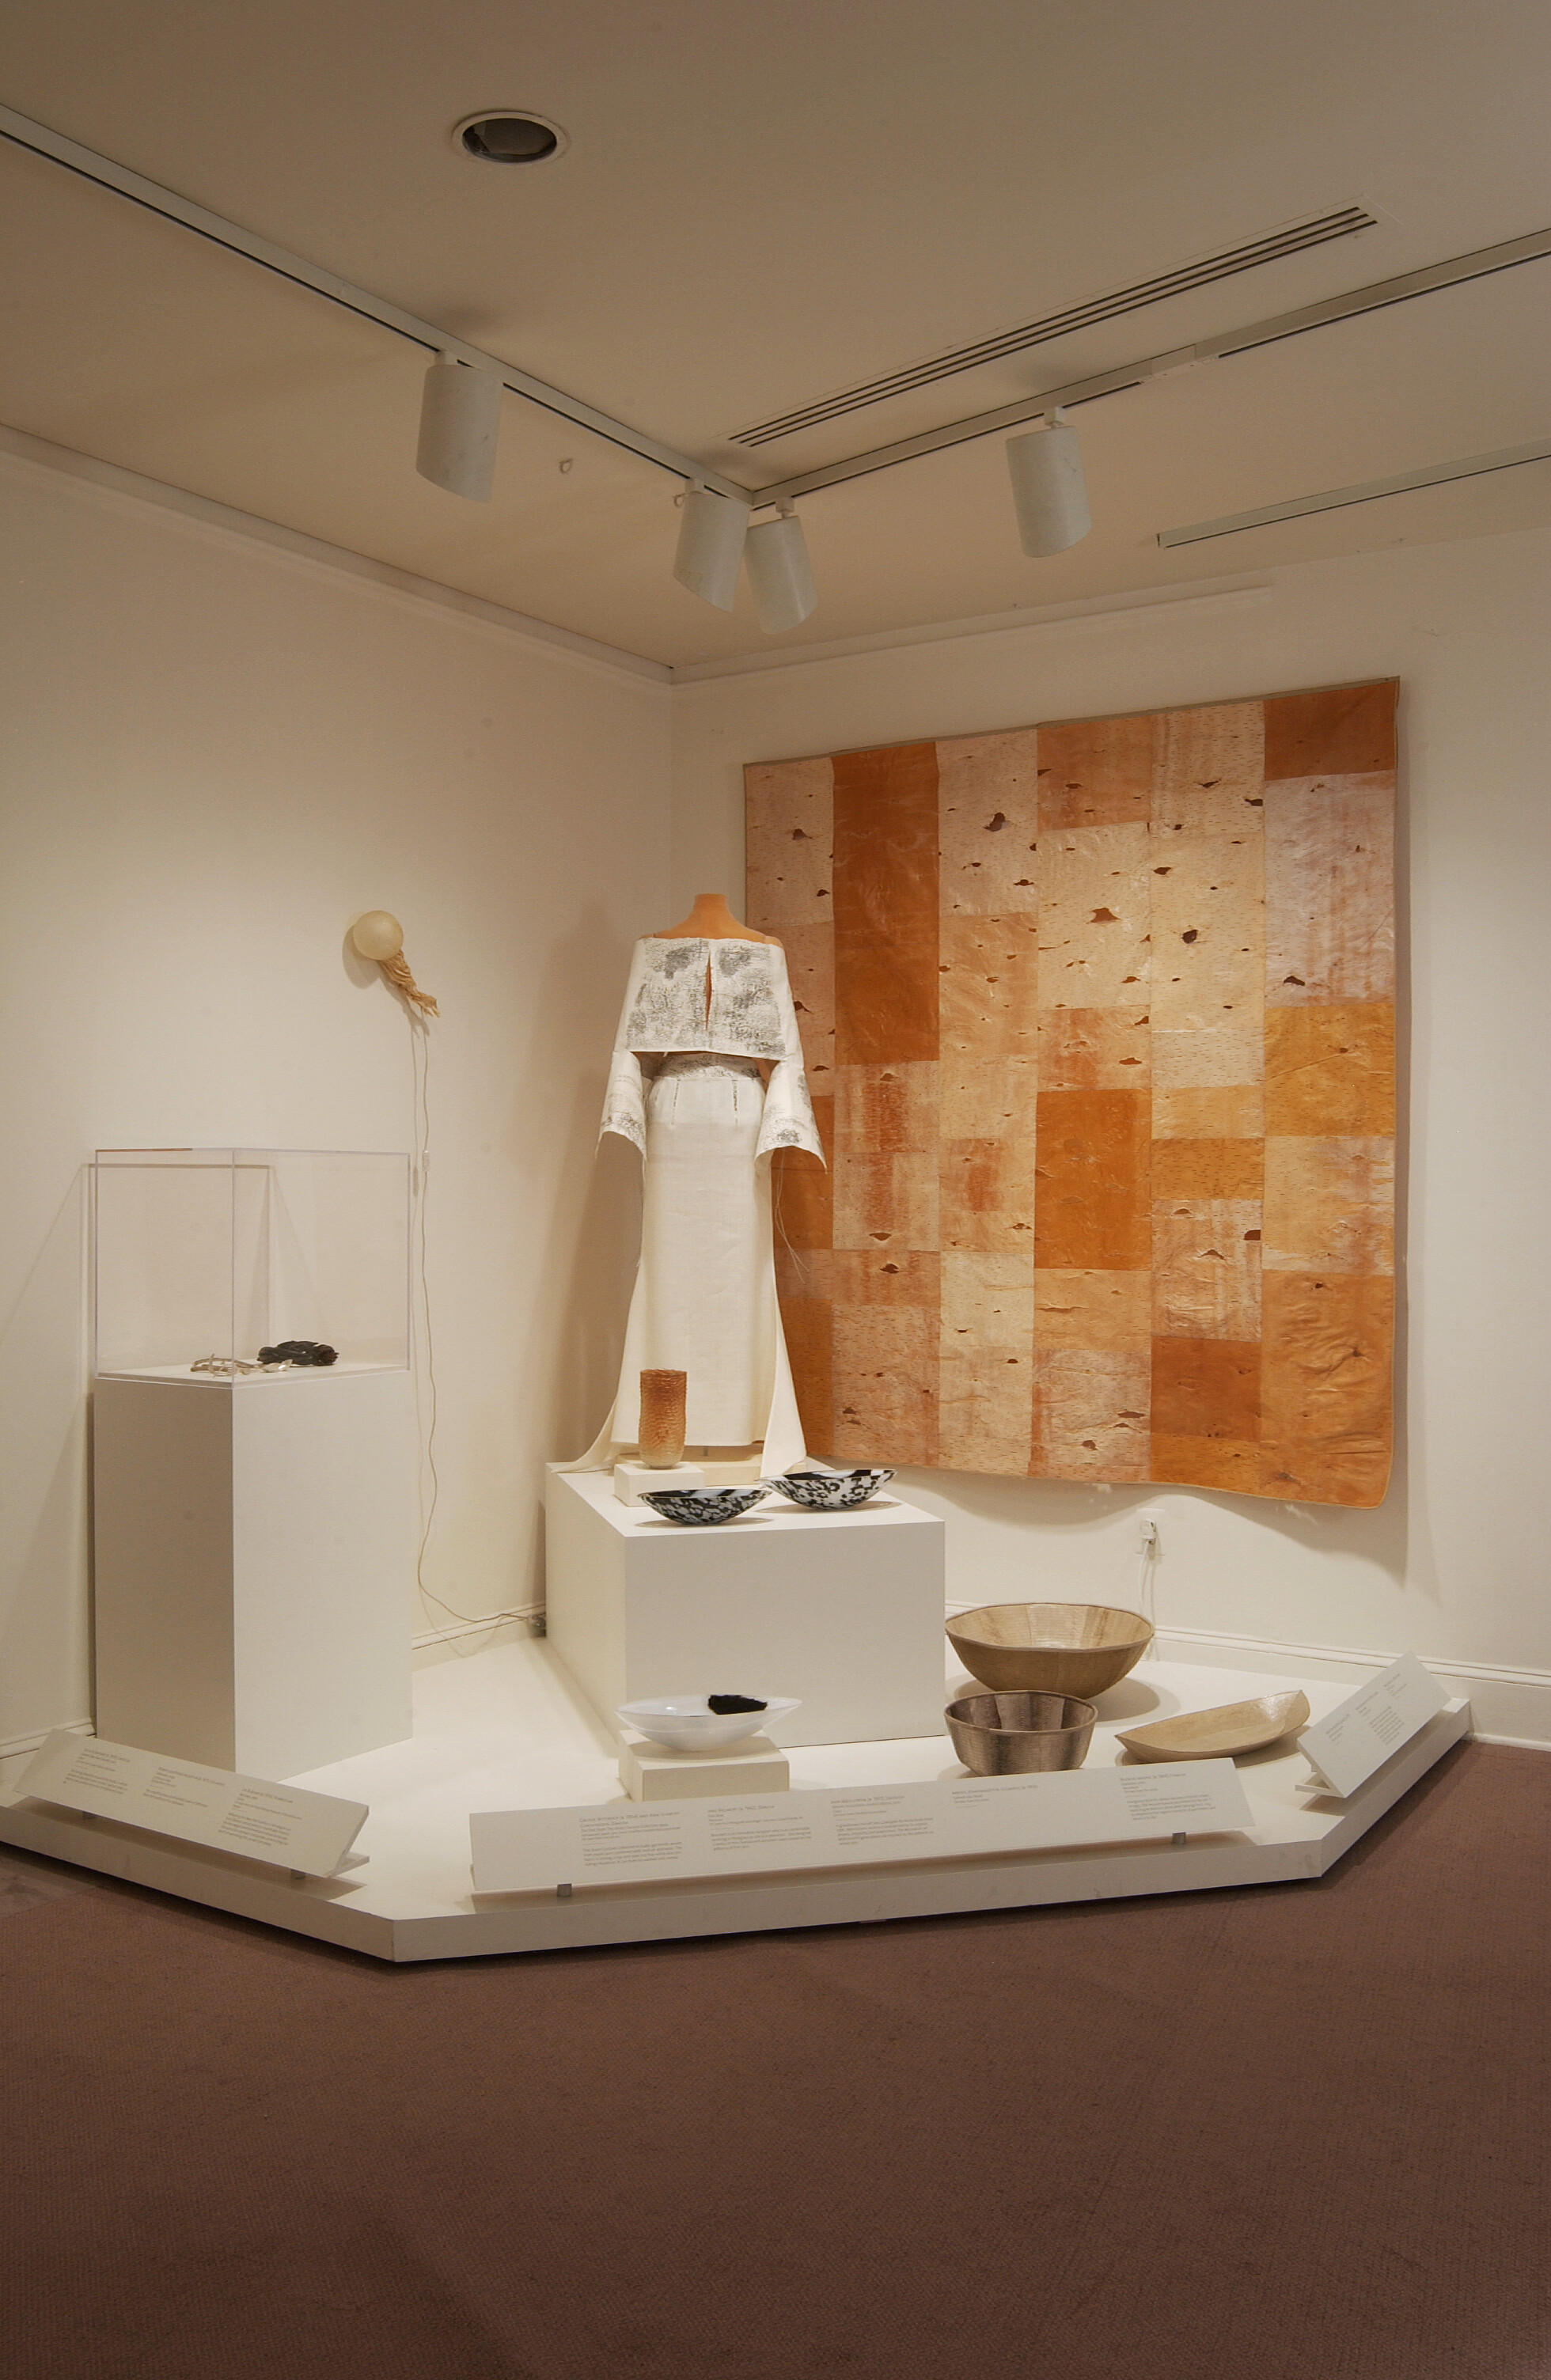 Installation view of a gallery space with white walls and several artworks presented on a pedestal in the corner. The artworks include a large, beige textile art piece hanging from the wall, a mannequin wearing a white costume, and a variety of bowls.